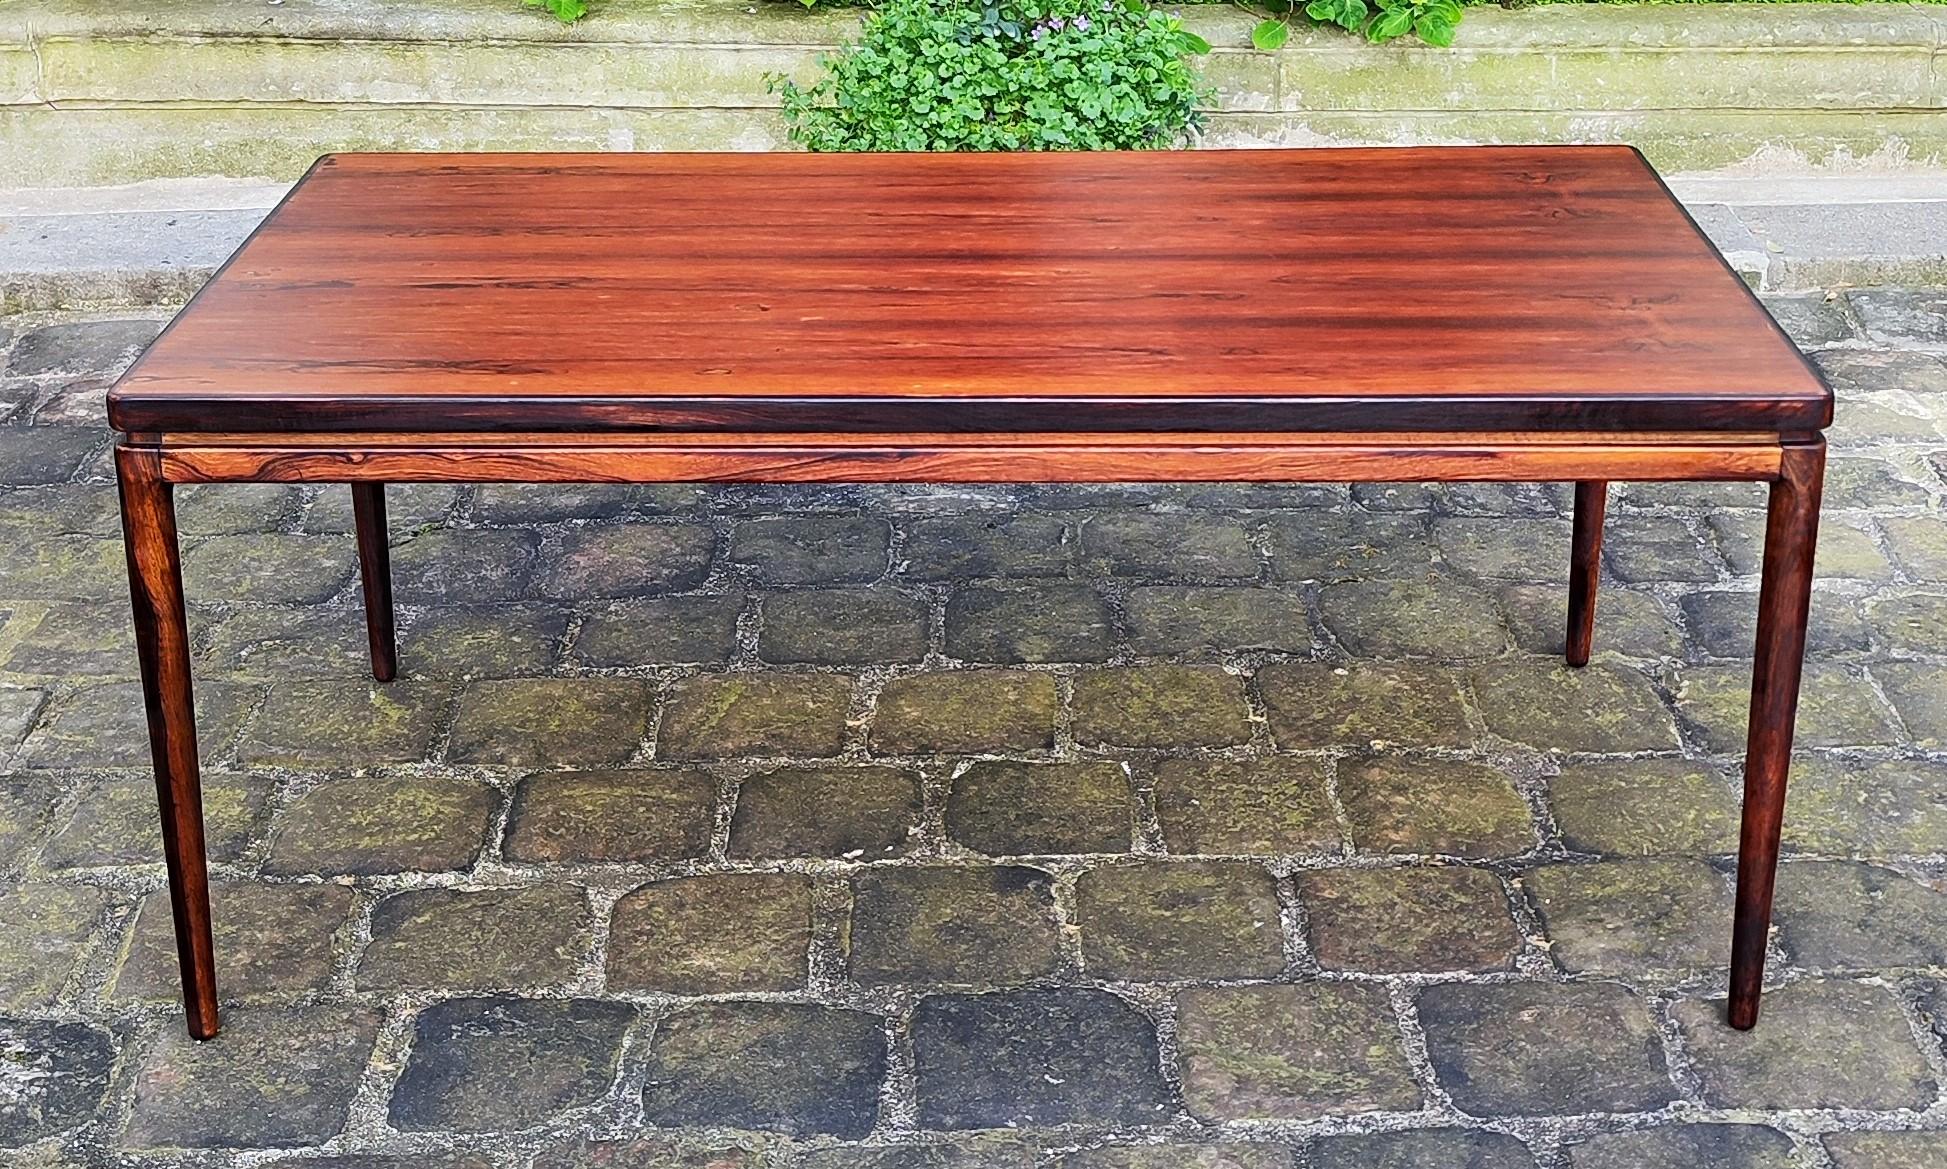 Dining table (which could serve as a desk), probably in Rio rosewood, by Johannes Andersen, publisher CHR Linneberg, 1960s.

Large rectangular dining table from the 60s. This one does not have its extensions.
.
Made in Denmark.
.
The table is in